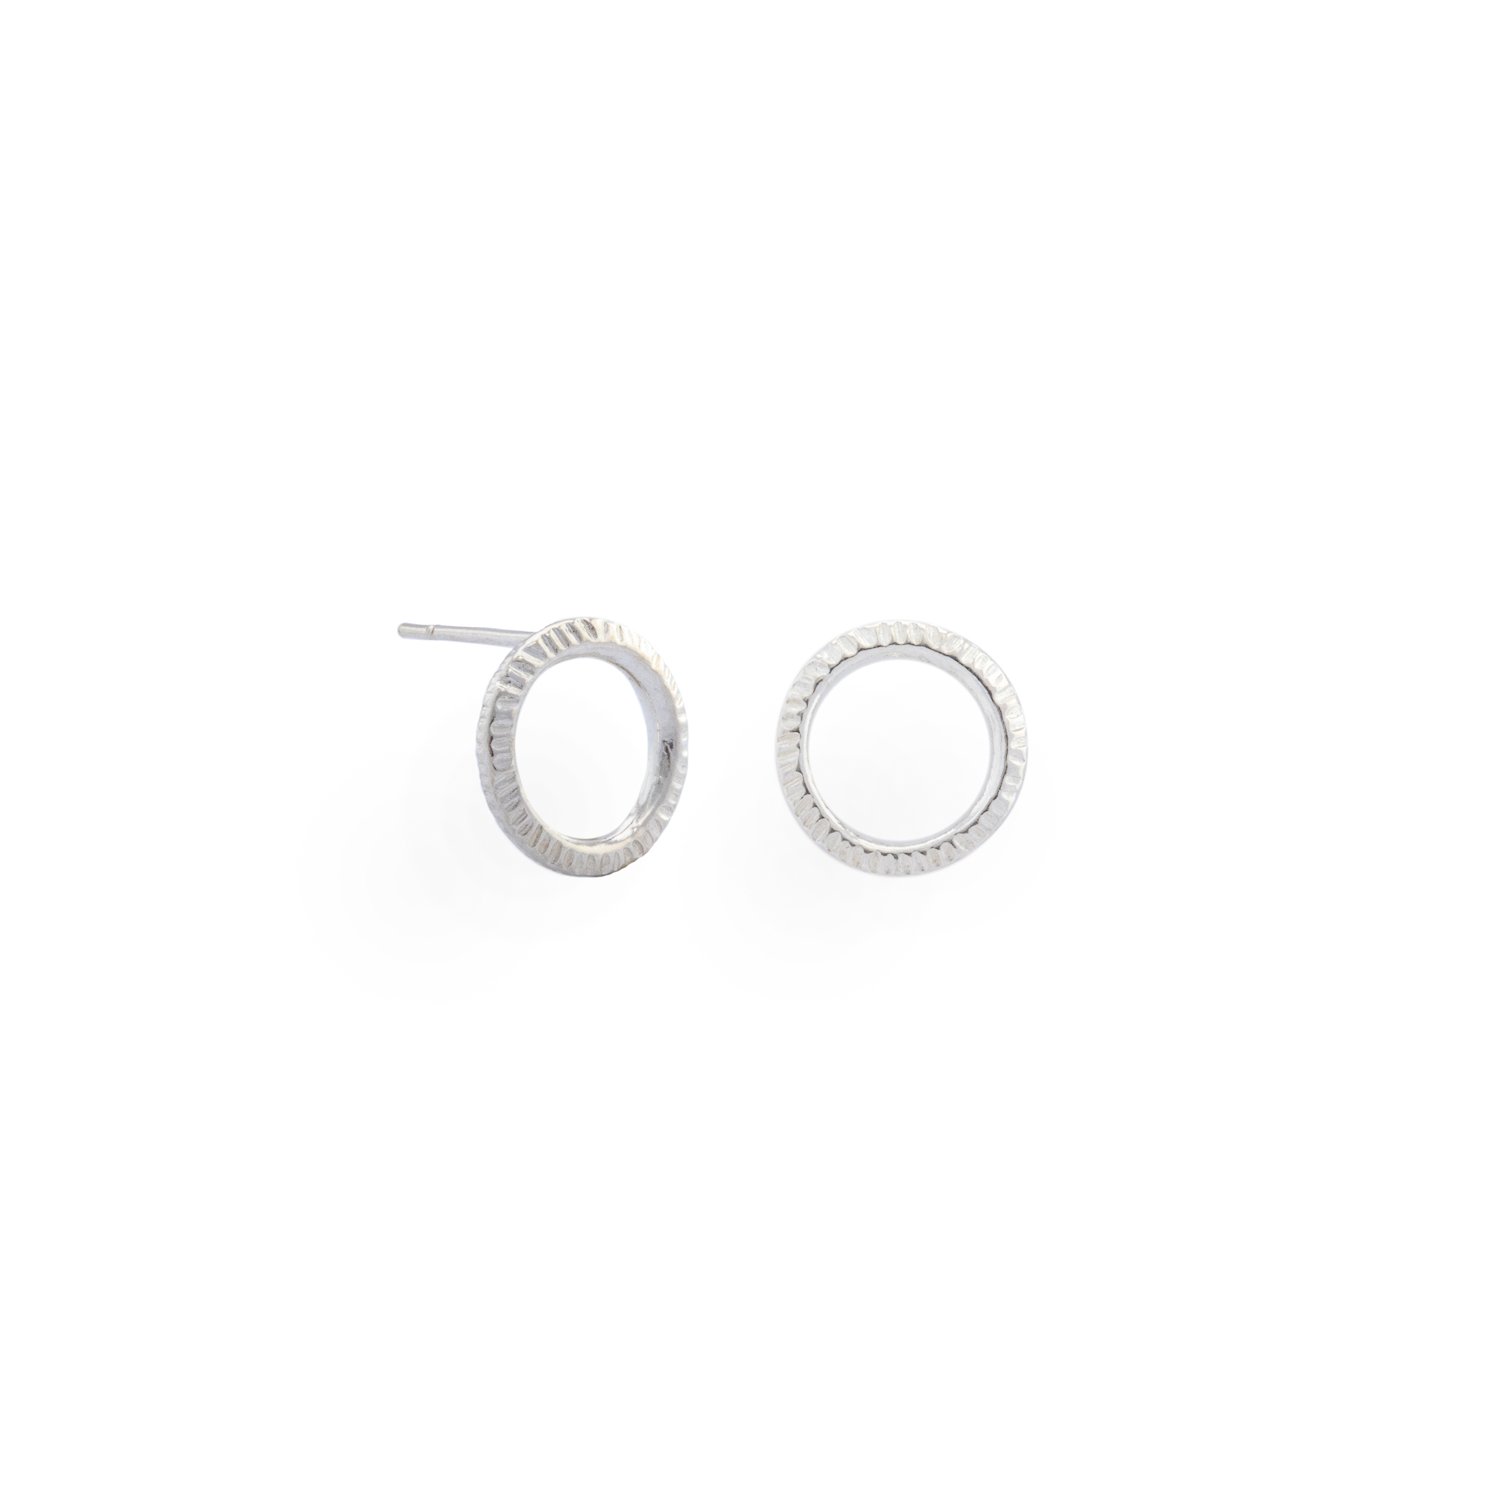 circle-stud-earrings-silver-small-white-background-1.jpg